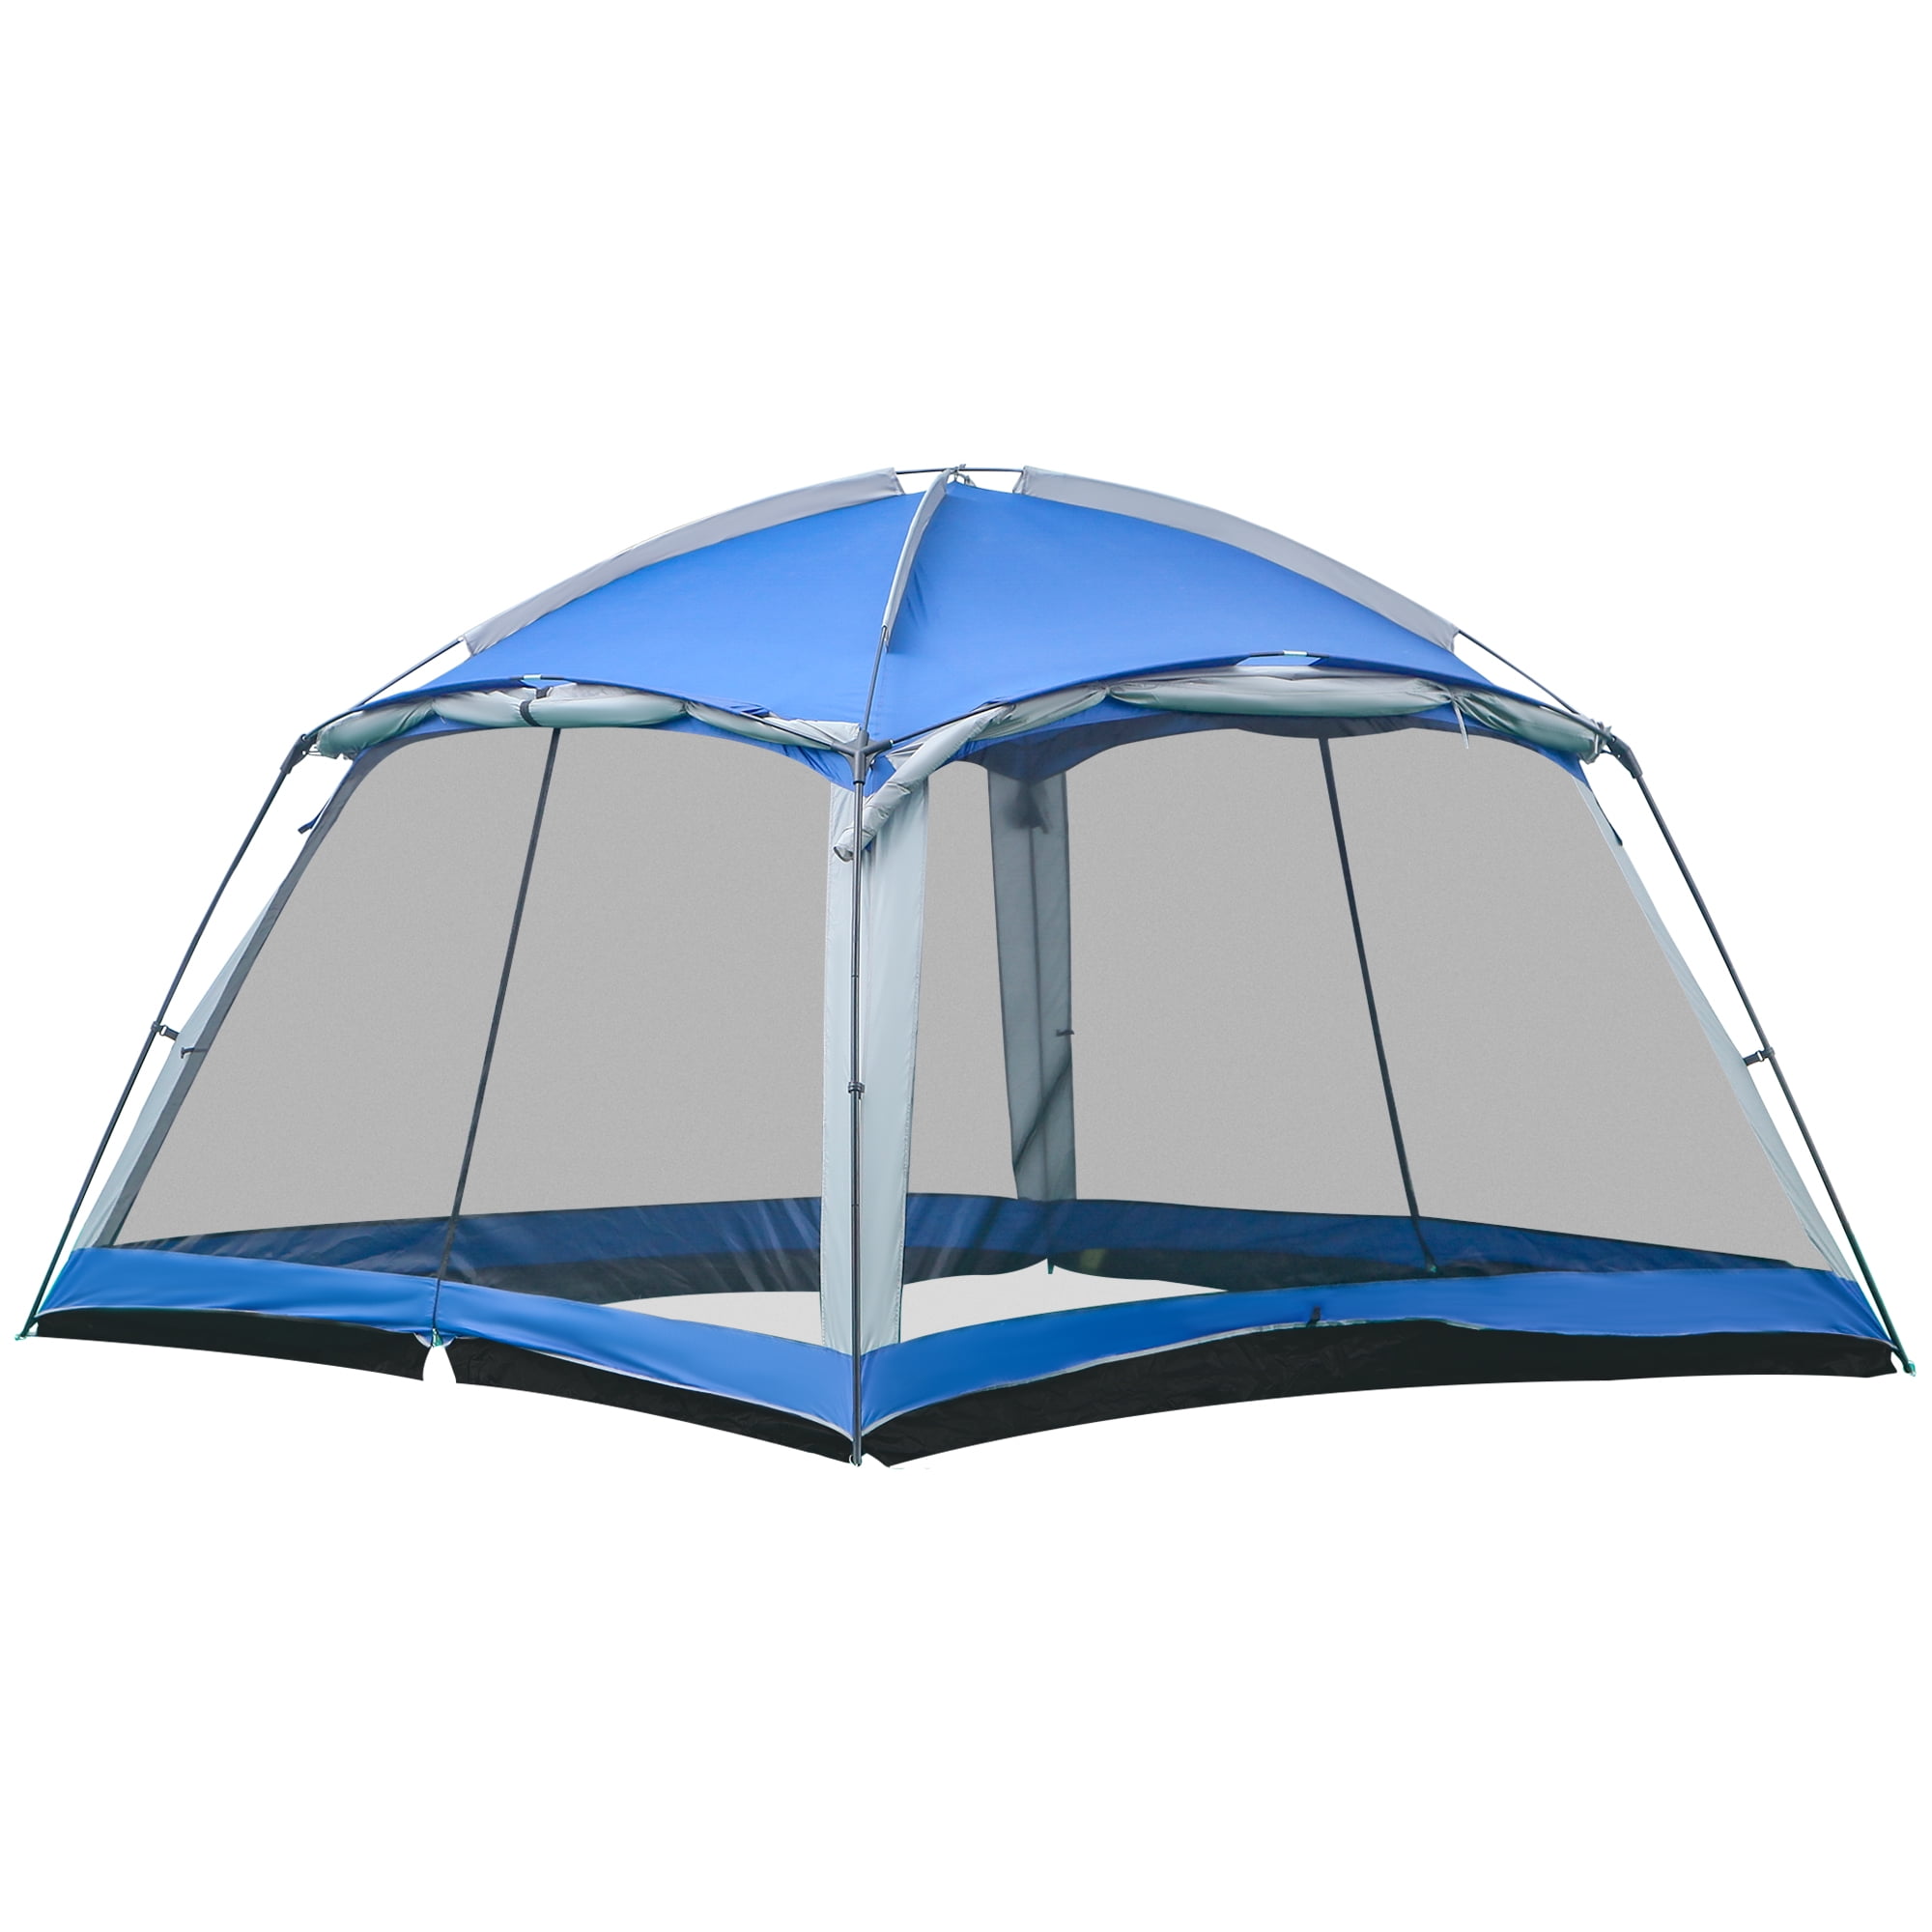 Outsunny 4-6 Persons Camping Tent Dome Family Travel Group Hiking Room Fishing 